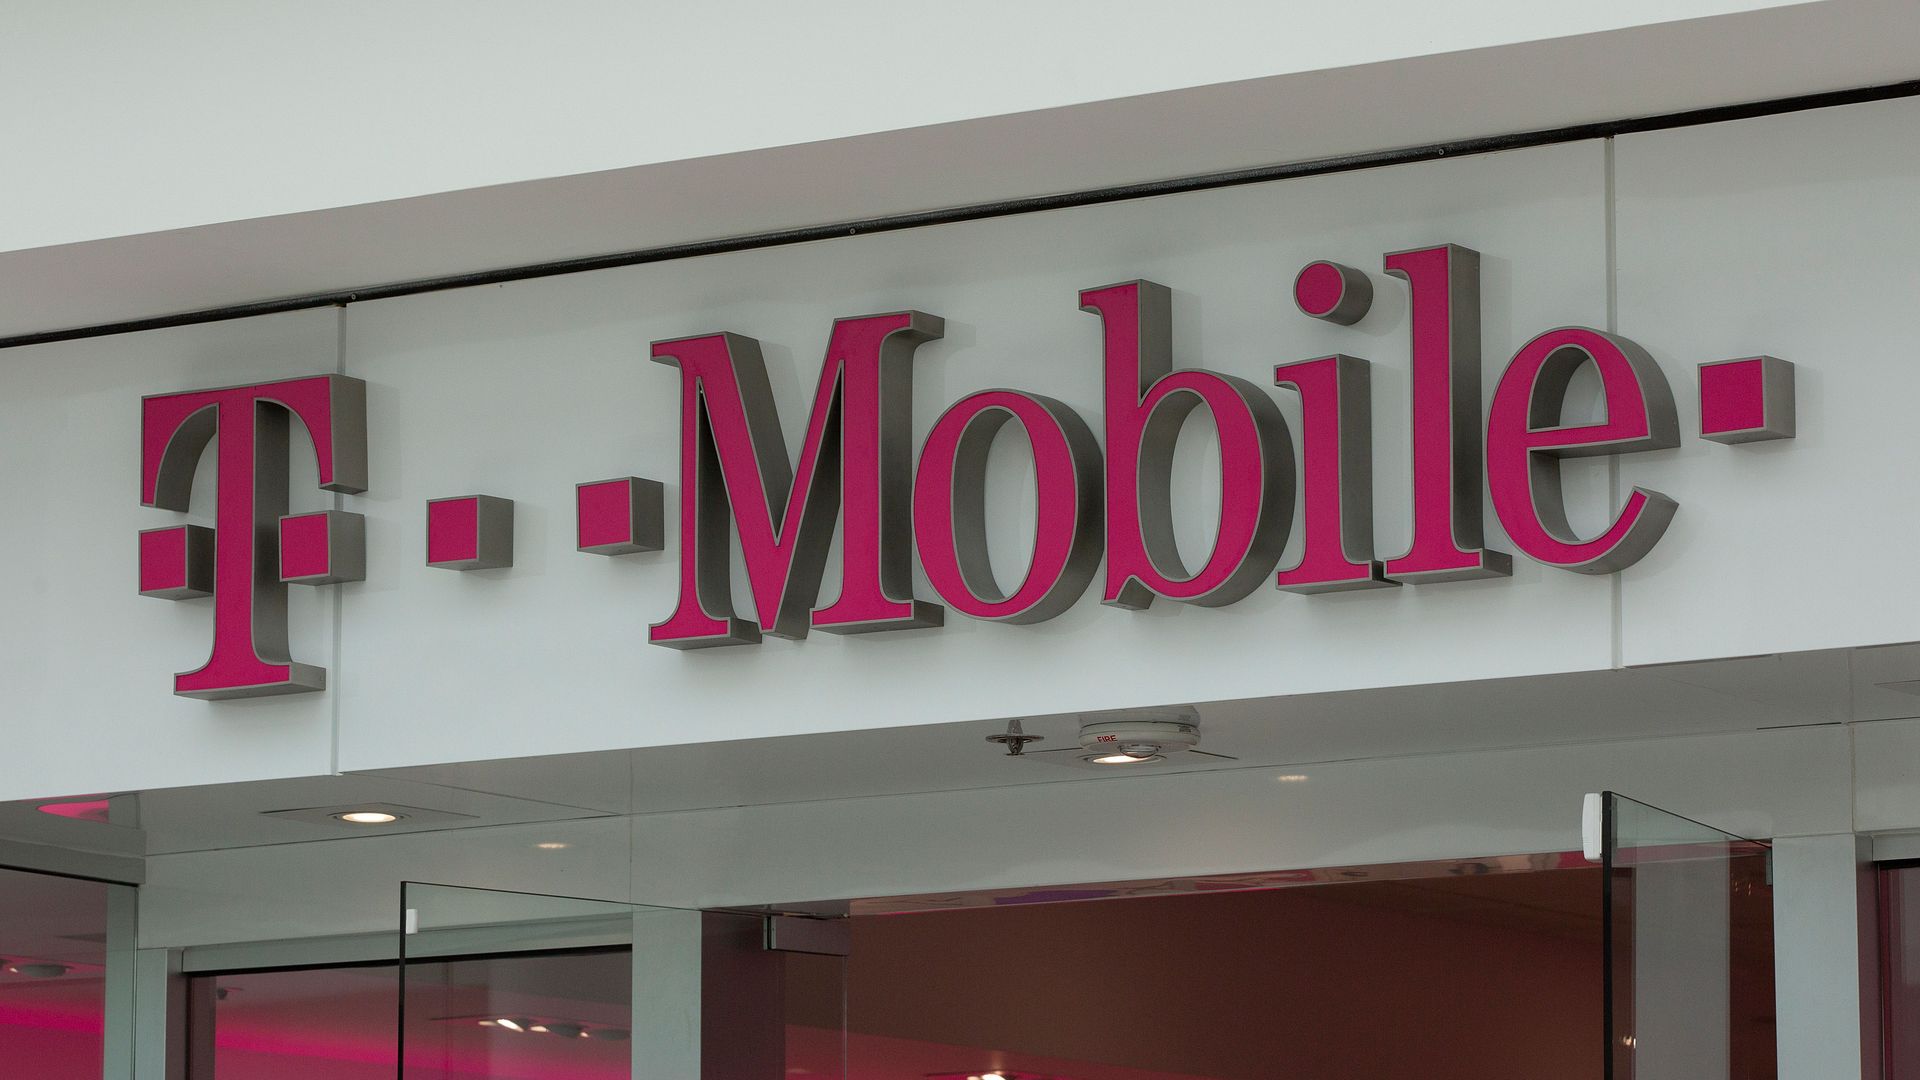 The front entrance of a T-Mobile store.